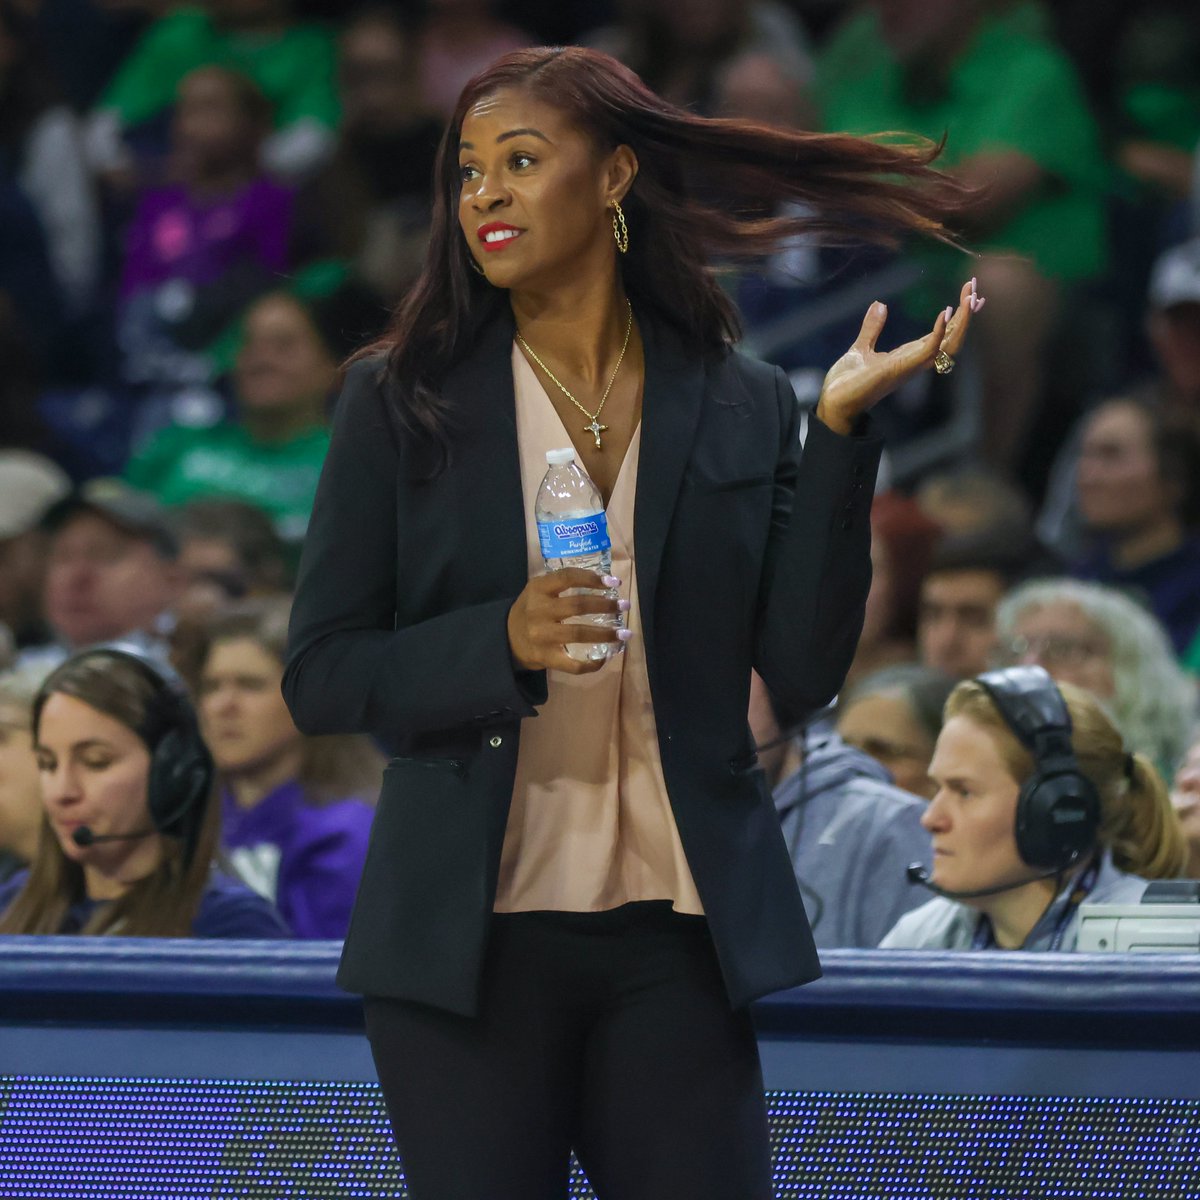 Notre Dame women's basketball is expected to host a transfer portal visit for a conference player of the year who averaged a double-double this past season. More intel from @BGInews here: on3.com/teams/notre-da…